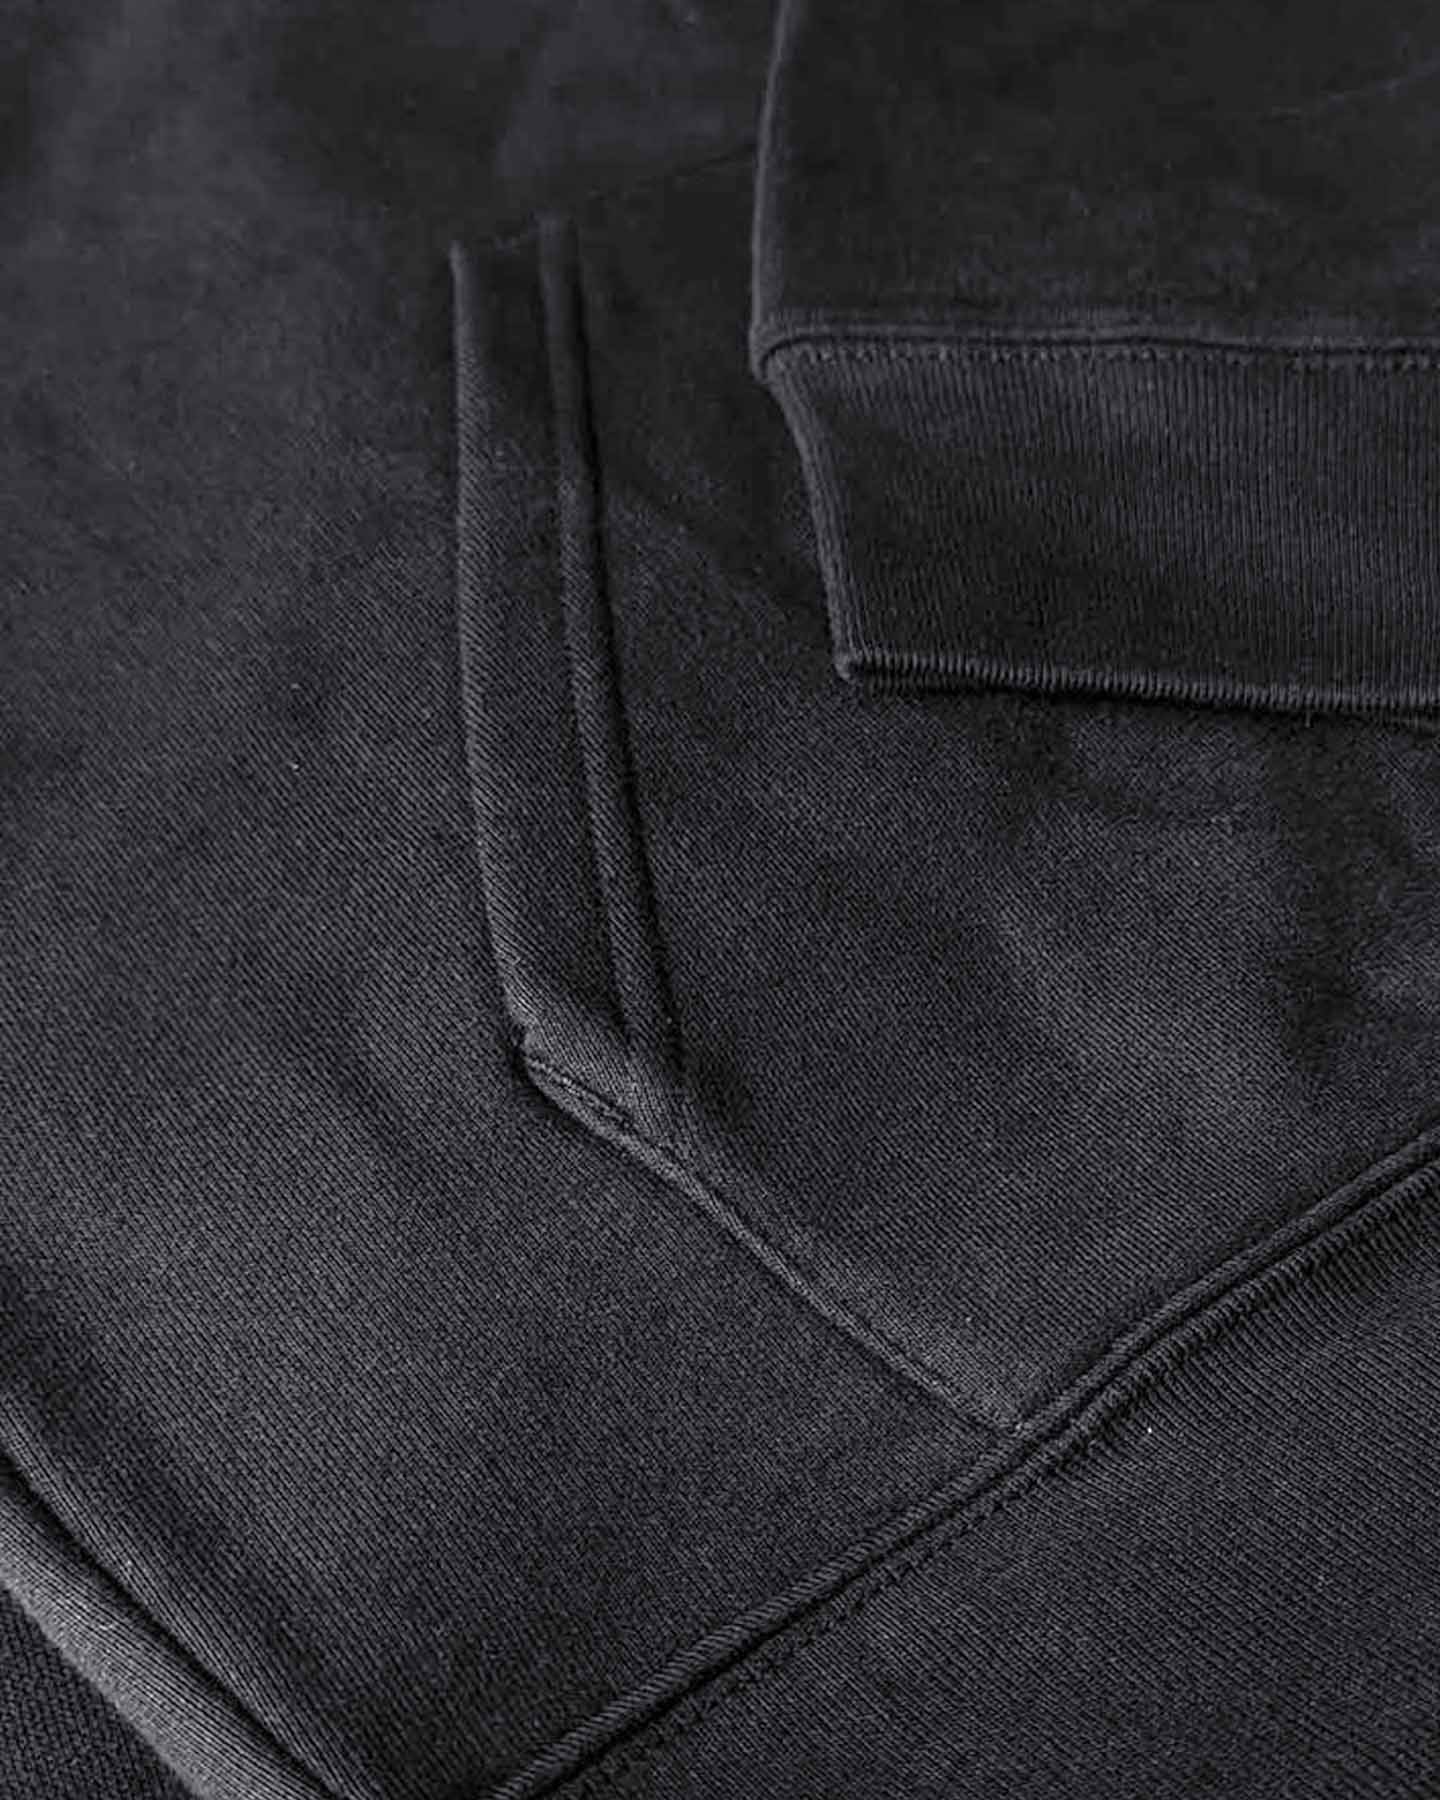 Close up of a black hoodie showing the cotton texture in fine detail